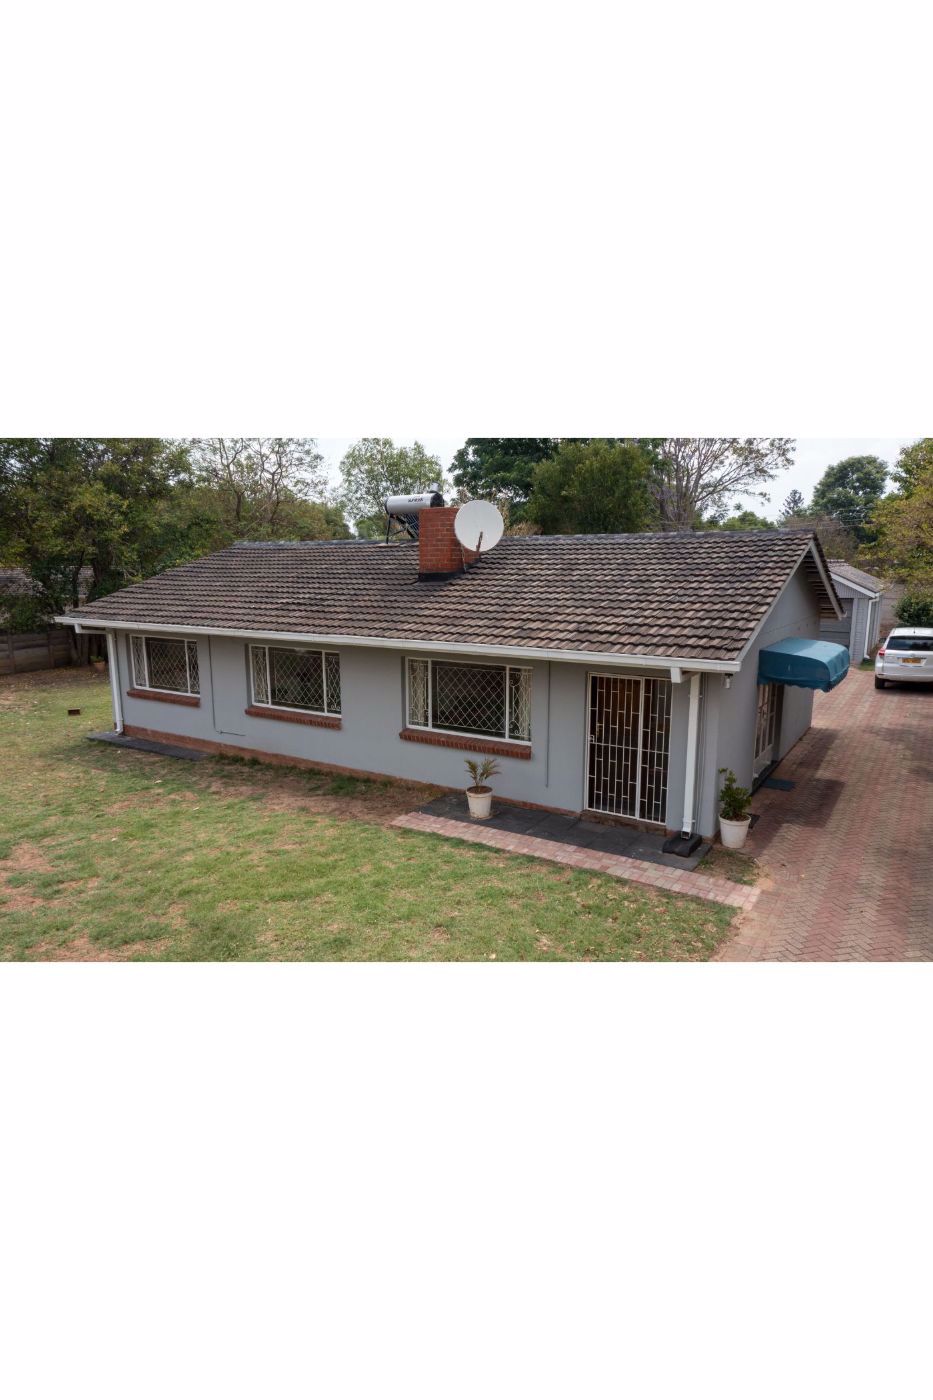 3 bedroom house for sale in Harare (Zimbabwe)